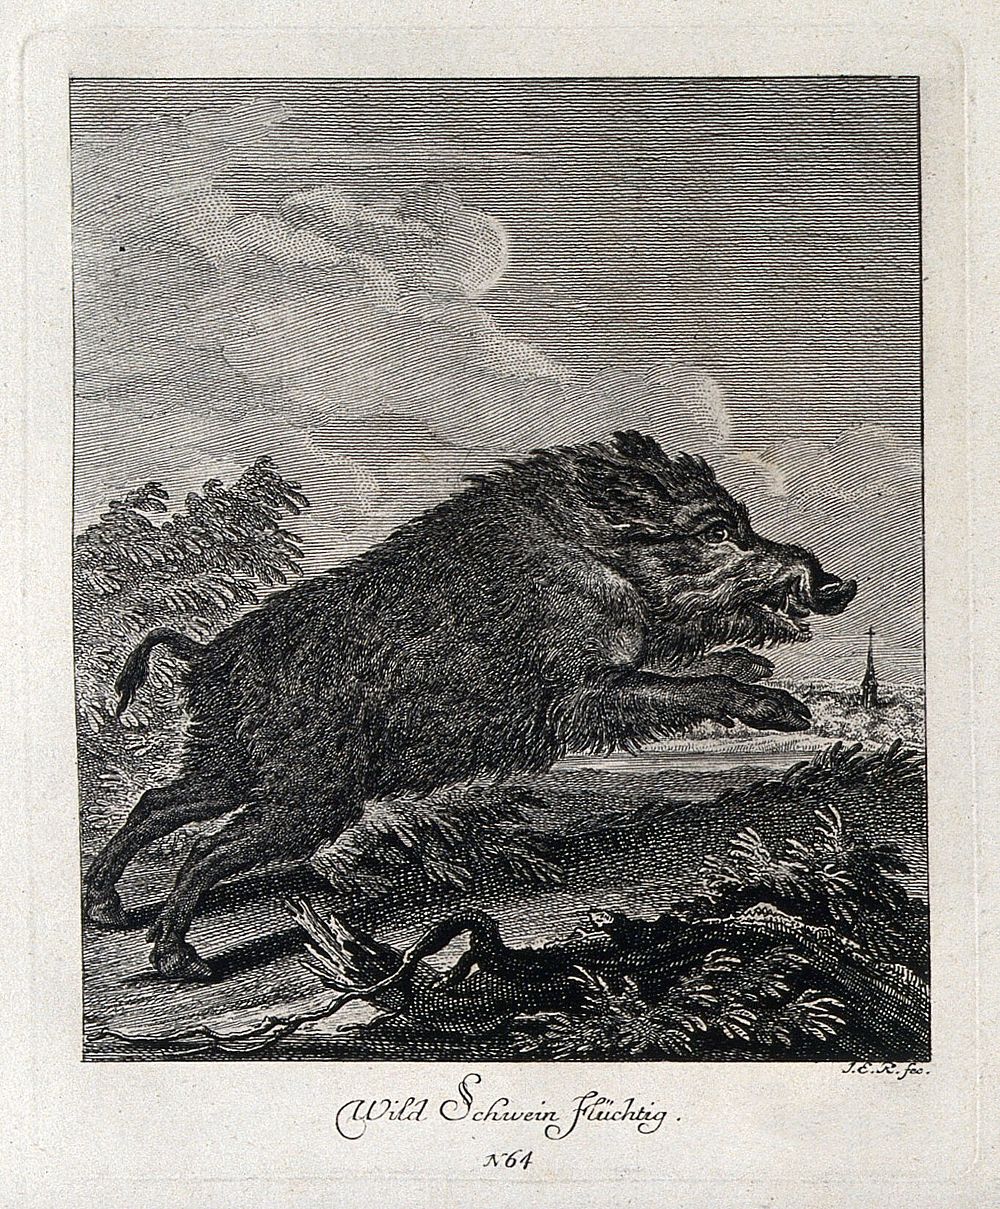 A wild boar running. Etching by J. E. Ridinger.